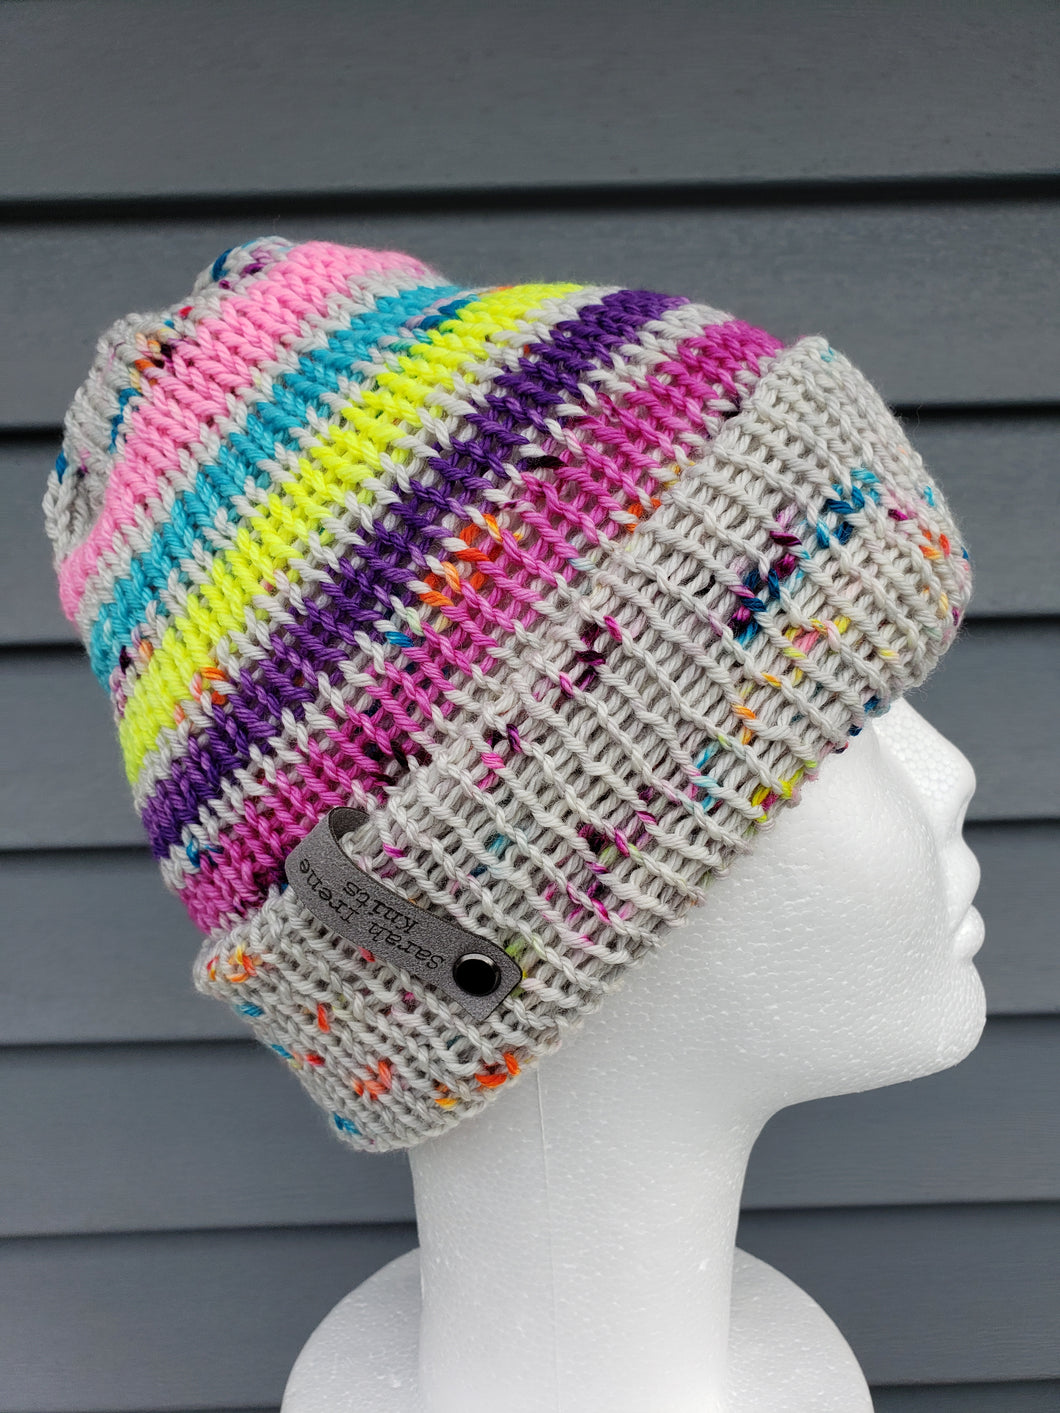 Double brim beanie in stripes of neon colors alternating with grey speckled bands. No pom.